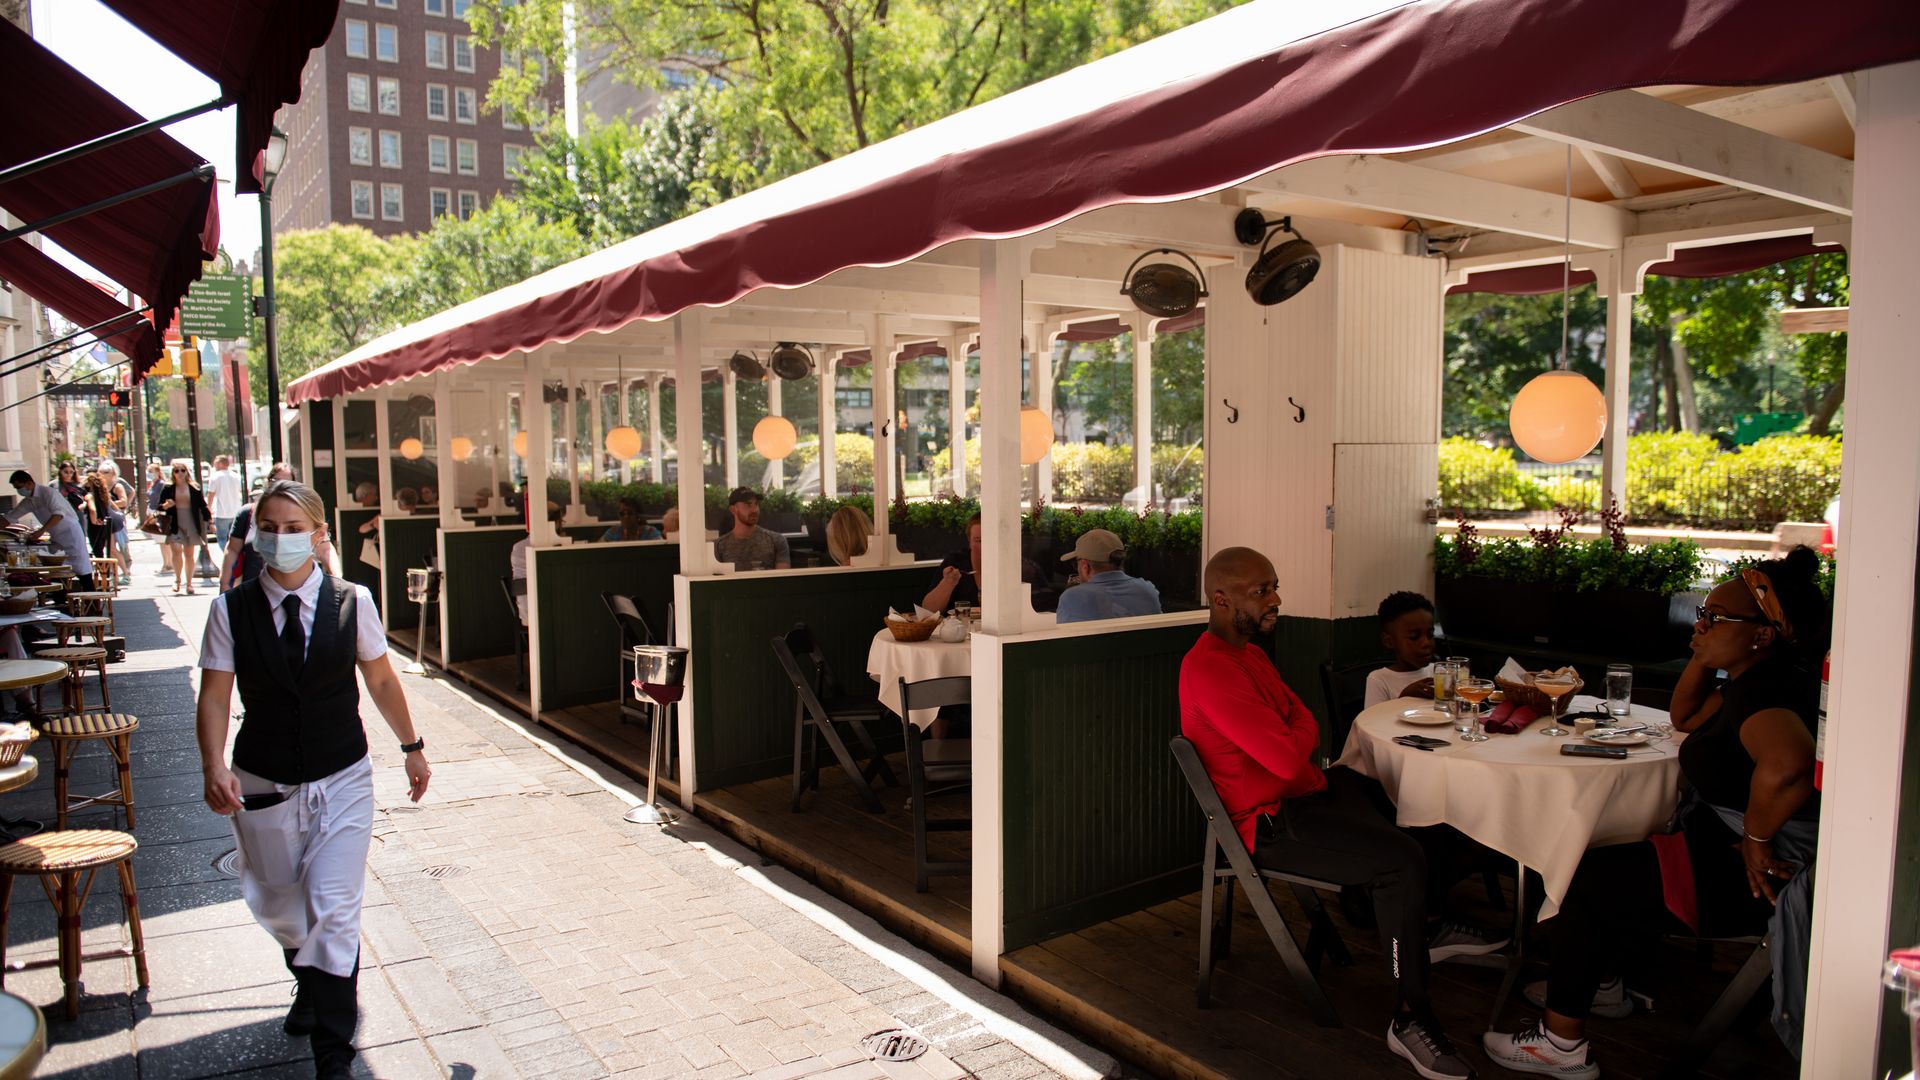 Guests sit in the outdoor dining section of restaurant in Philadelphia, Pennsylvania, U.S., on Thursday, Aug. 12, 2021.  Photo: Kriston Jae Bethel/Getty Images